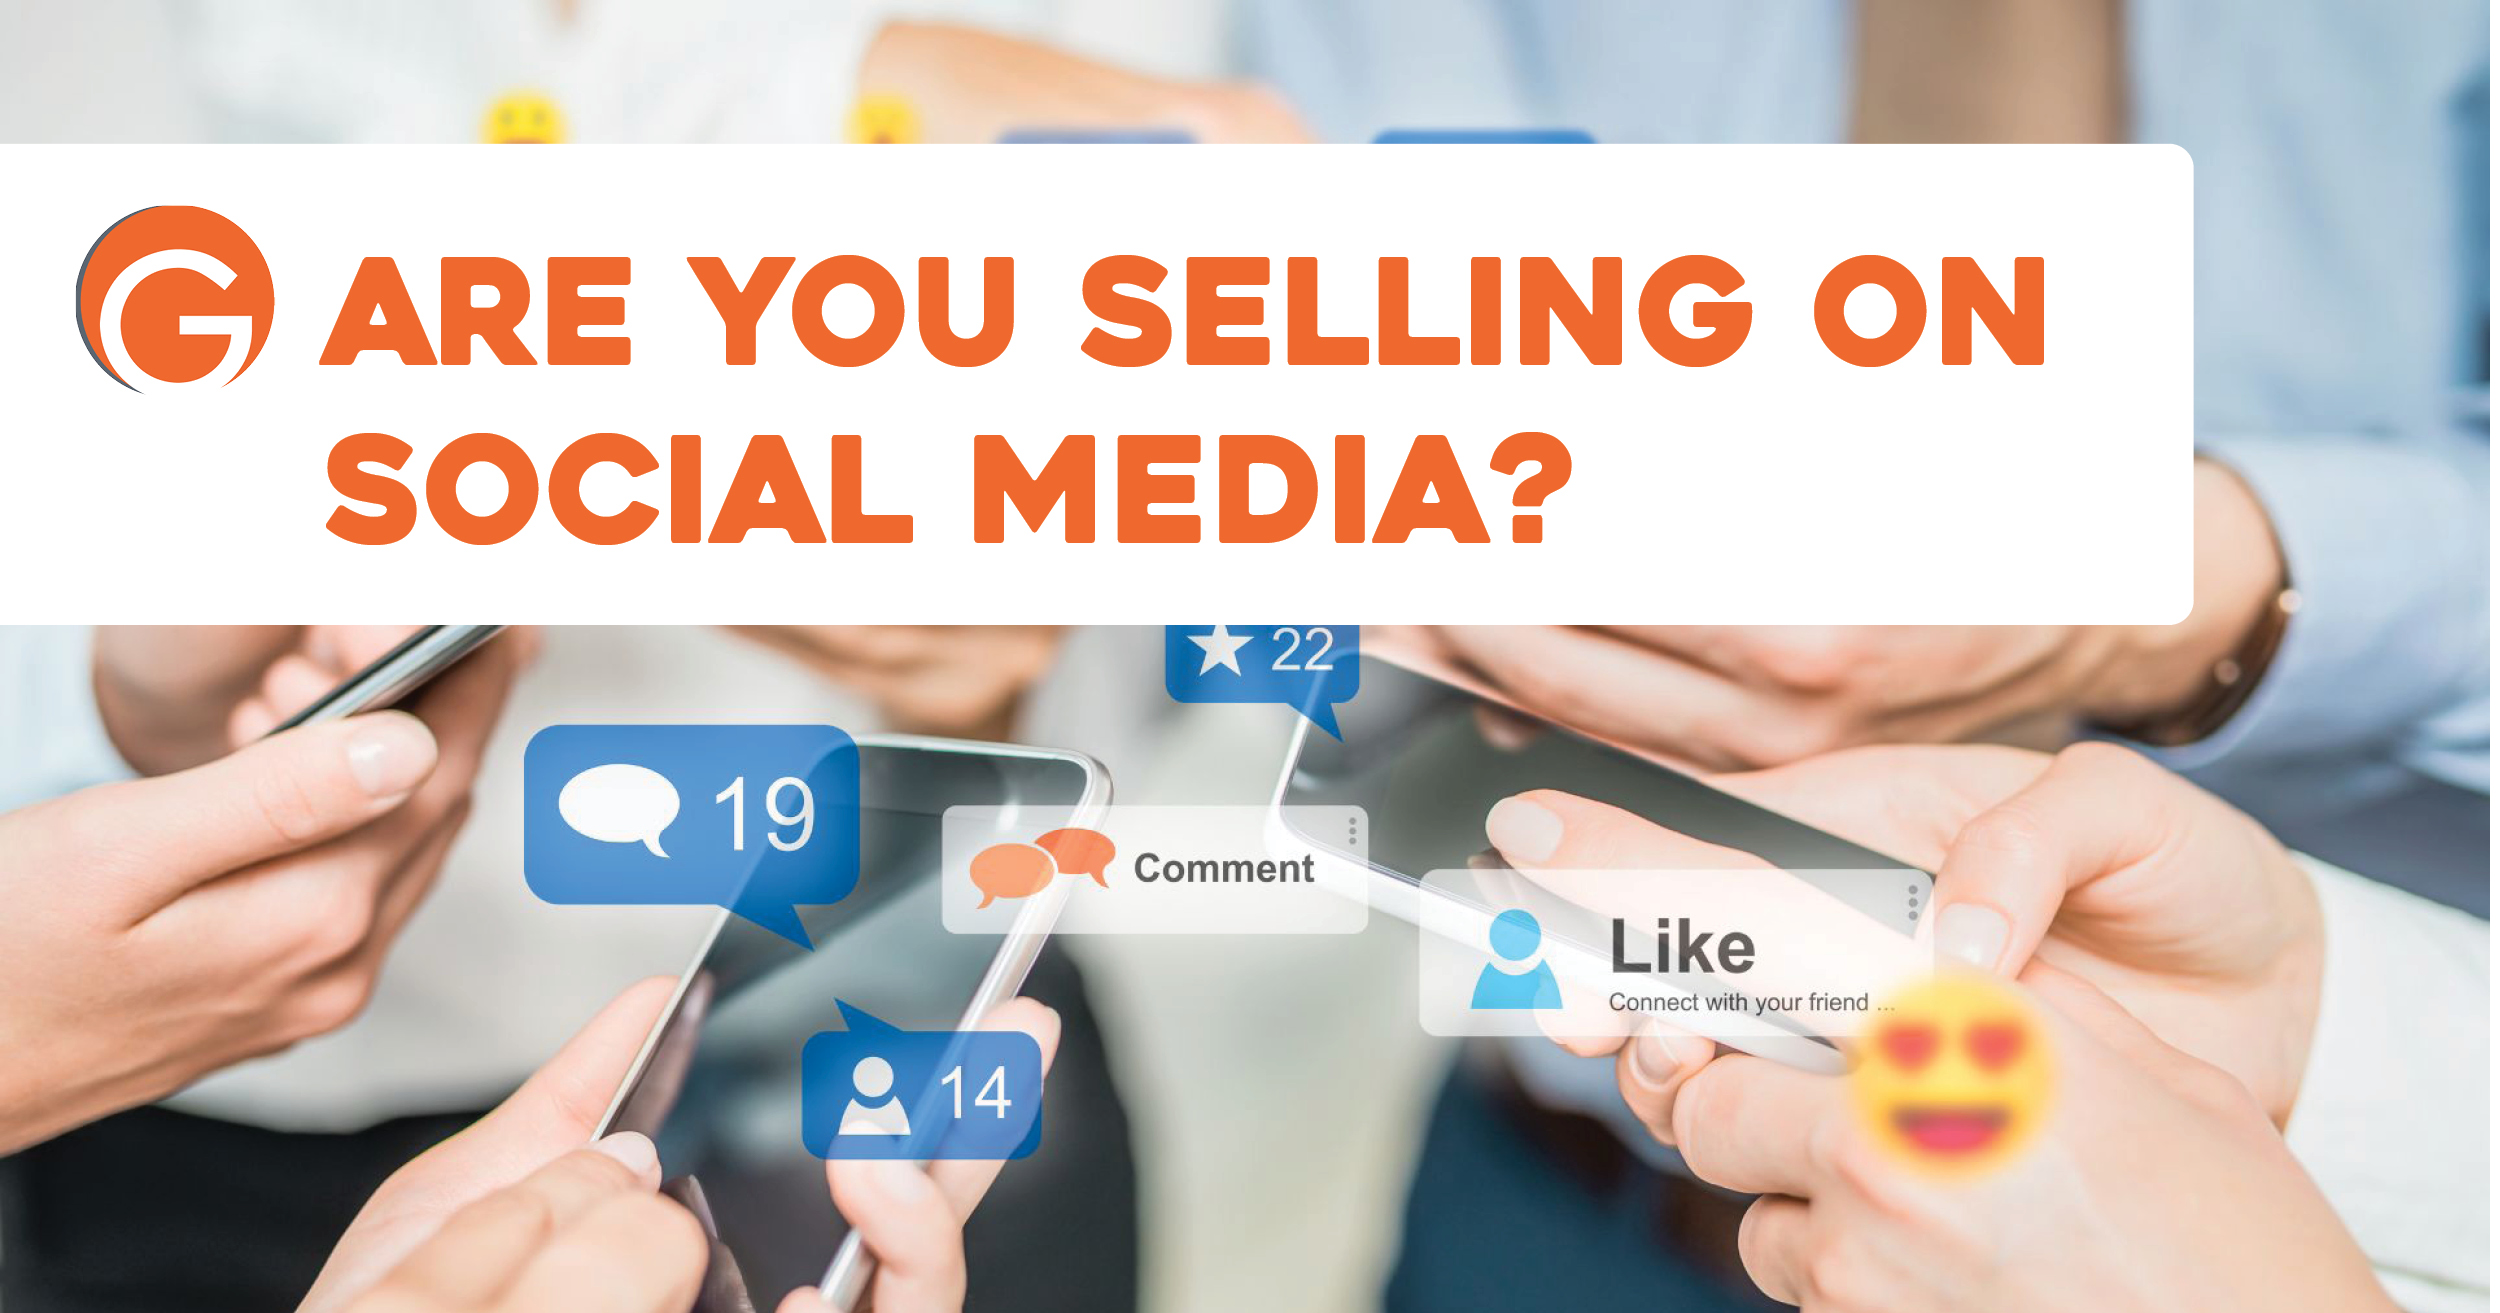 Are you selling on social media?